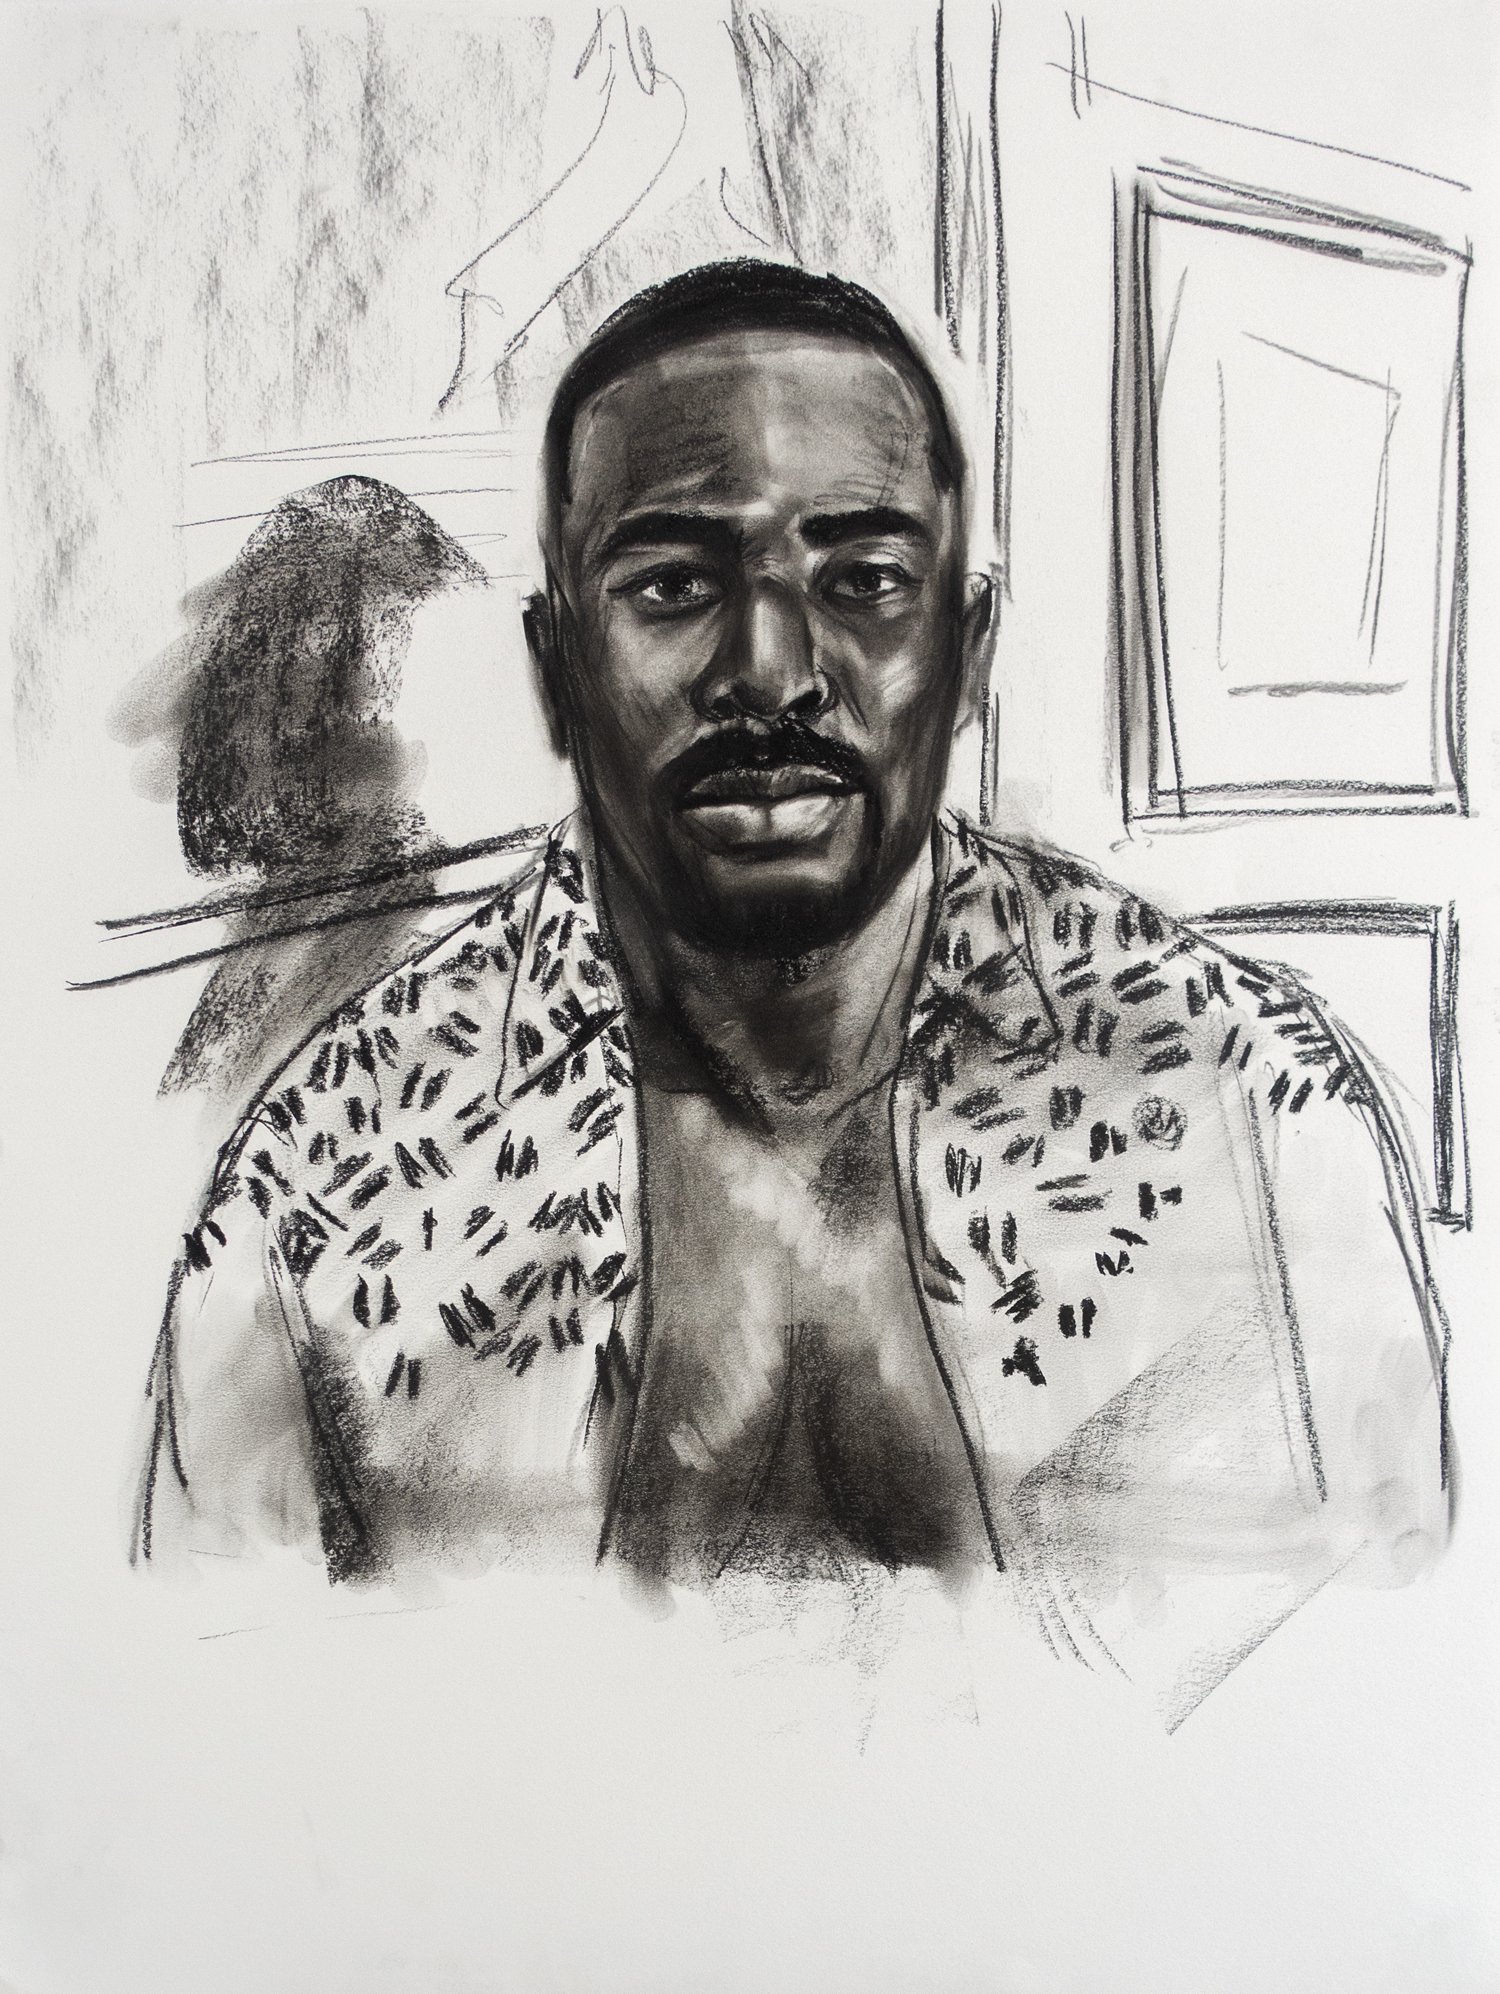   John MacConnell,  Kyle , 2020, charcoal on paper, 24”x18”   Inquire  